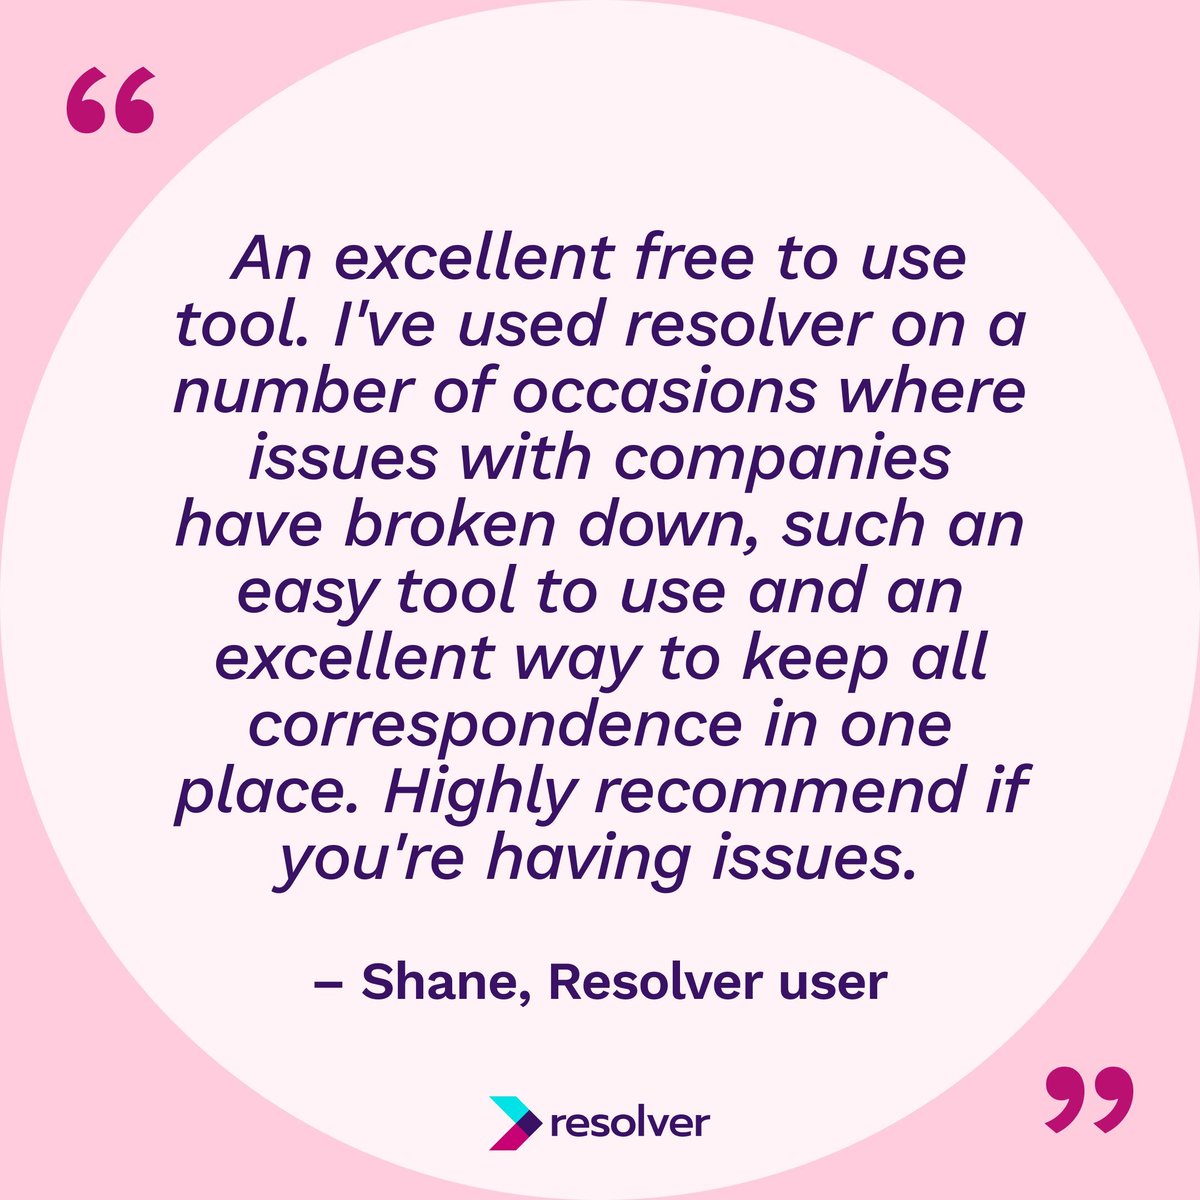 Dealing with a difficult dispute involving a UK-based company? Give Resolver a try! As a free resolution service, it’s our aim to help make the complaints process as easy as possible. Submit your case today: buff.ly/3UYuEfZ